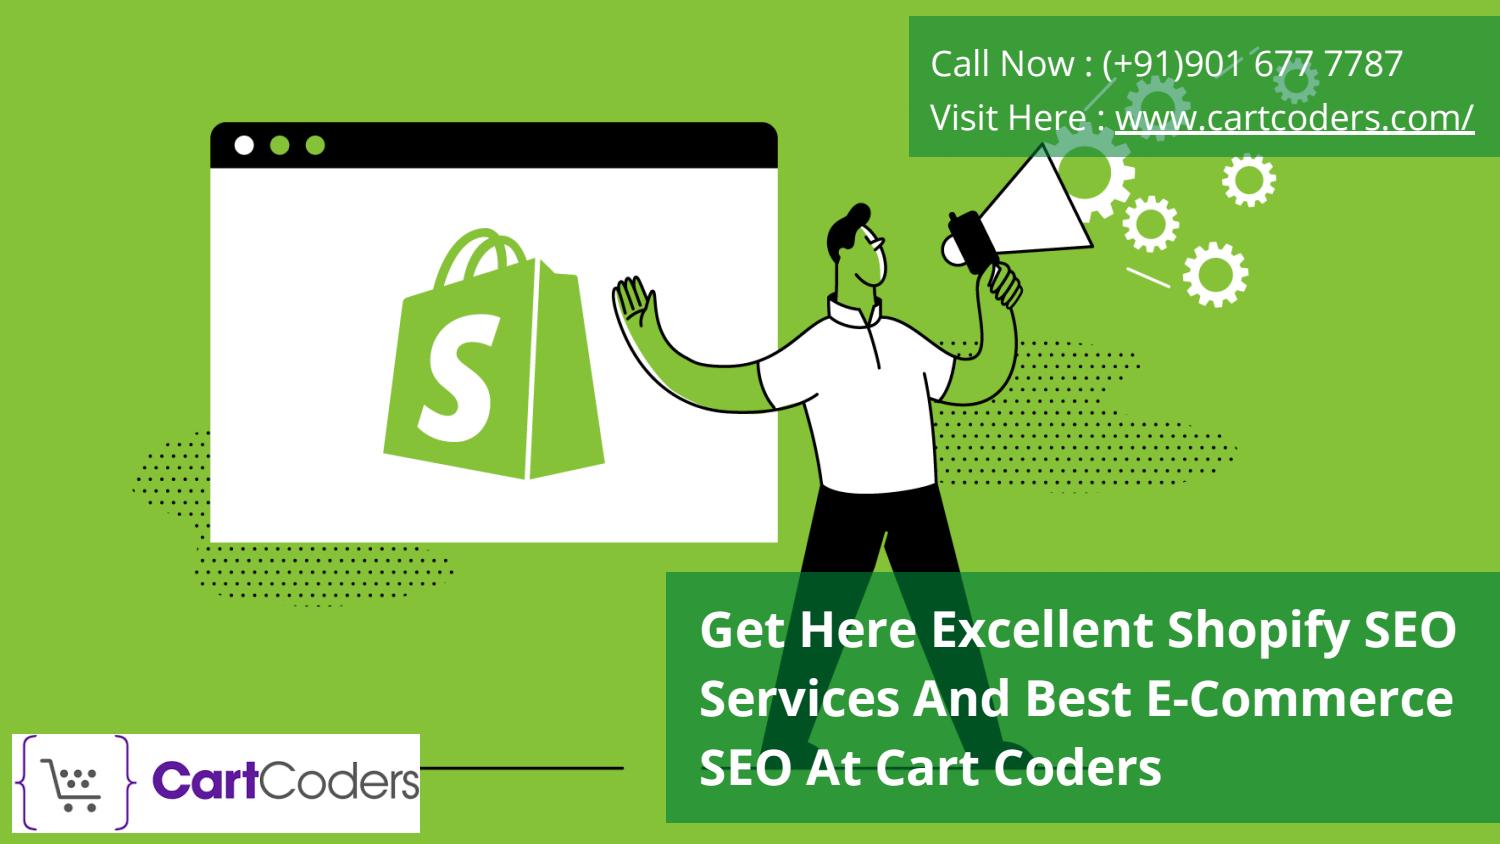 CartCoders - #1 Shopify SEO Experts offers latest Shopify SEO strategy